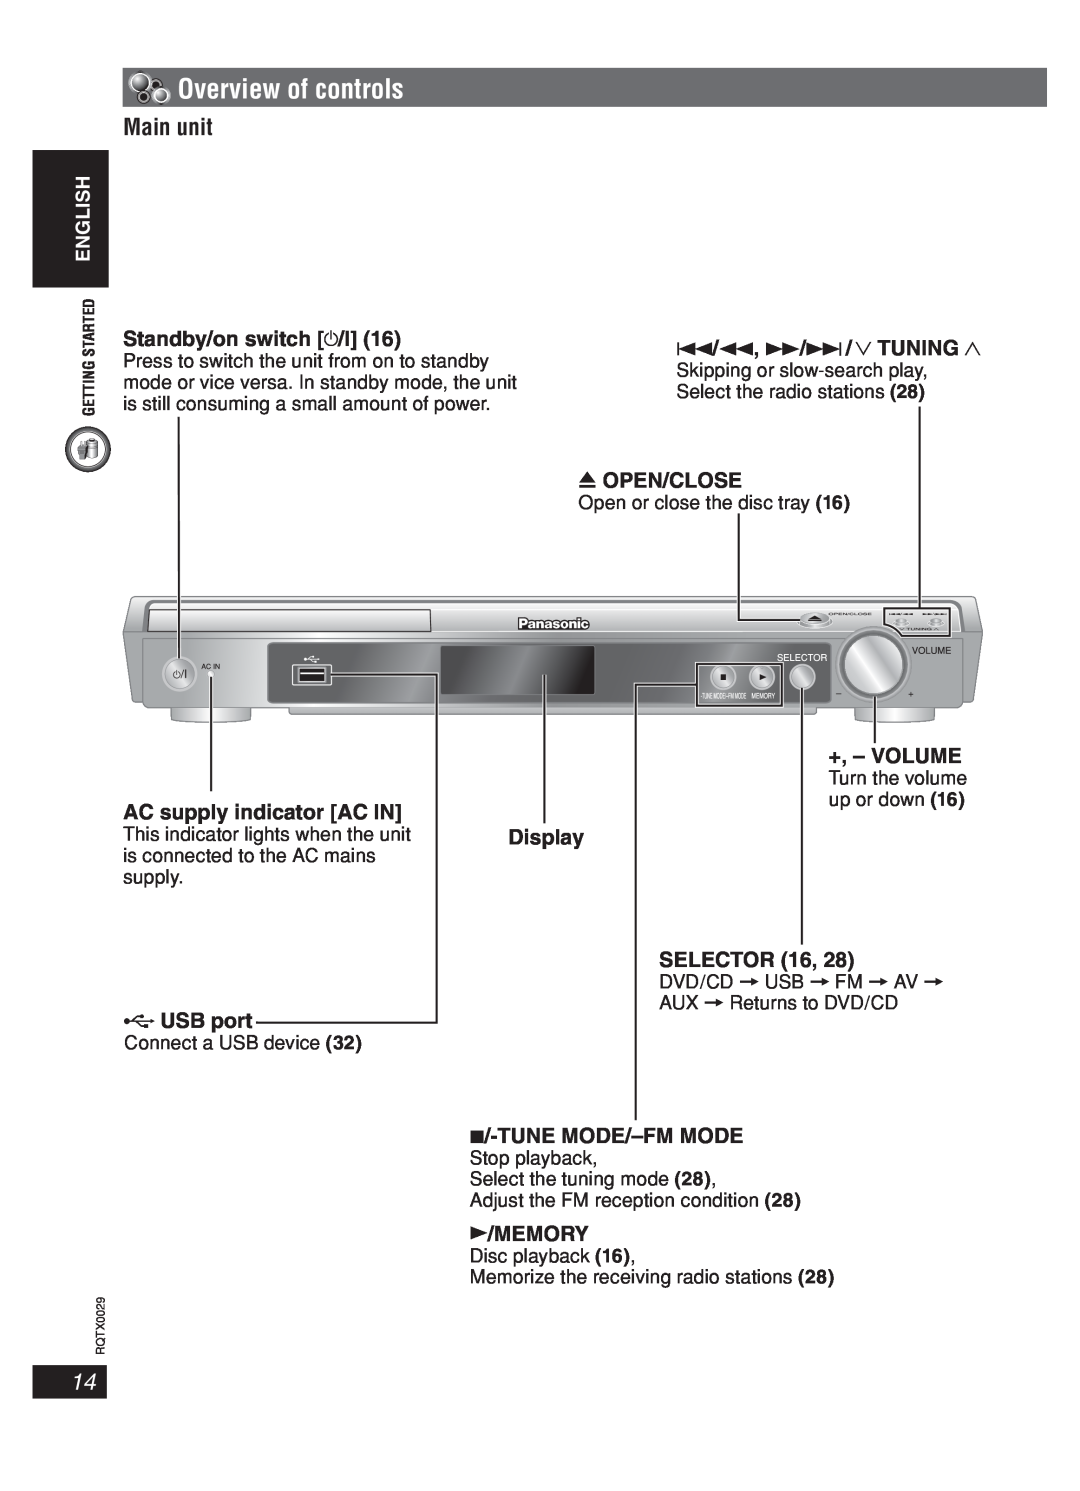 Panasonic sc-pt150 Overview of controls, Main unit, Standby/on switch y/I, 4/1, ¡/¢ / 4 TUNING, 0OPEN/CLOSE, USB port 